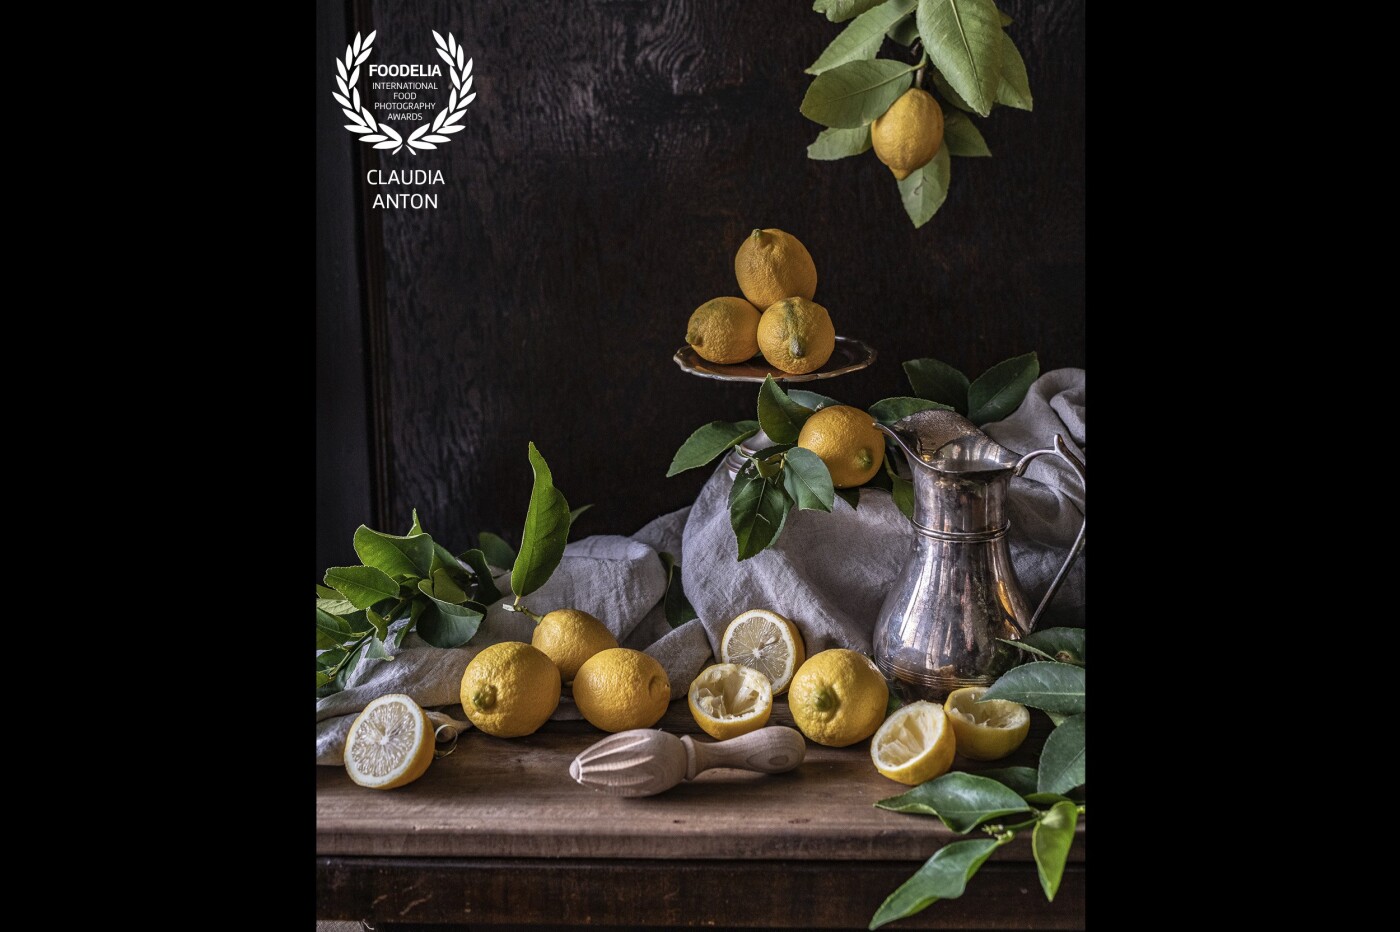 Still life with garden lemons. <br />
Inspired by the beautifully lit paintings of the Dutch masters and my carefully nurtured crop of fragrant lemons, whose delicious aroma wafted from the table as I captured them.